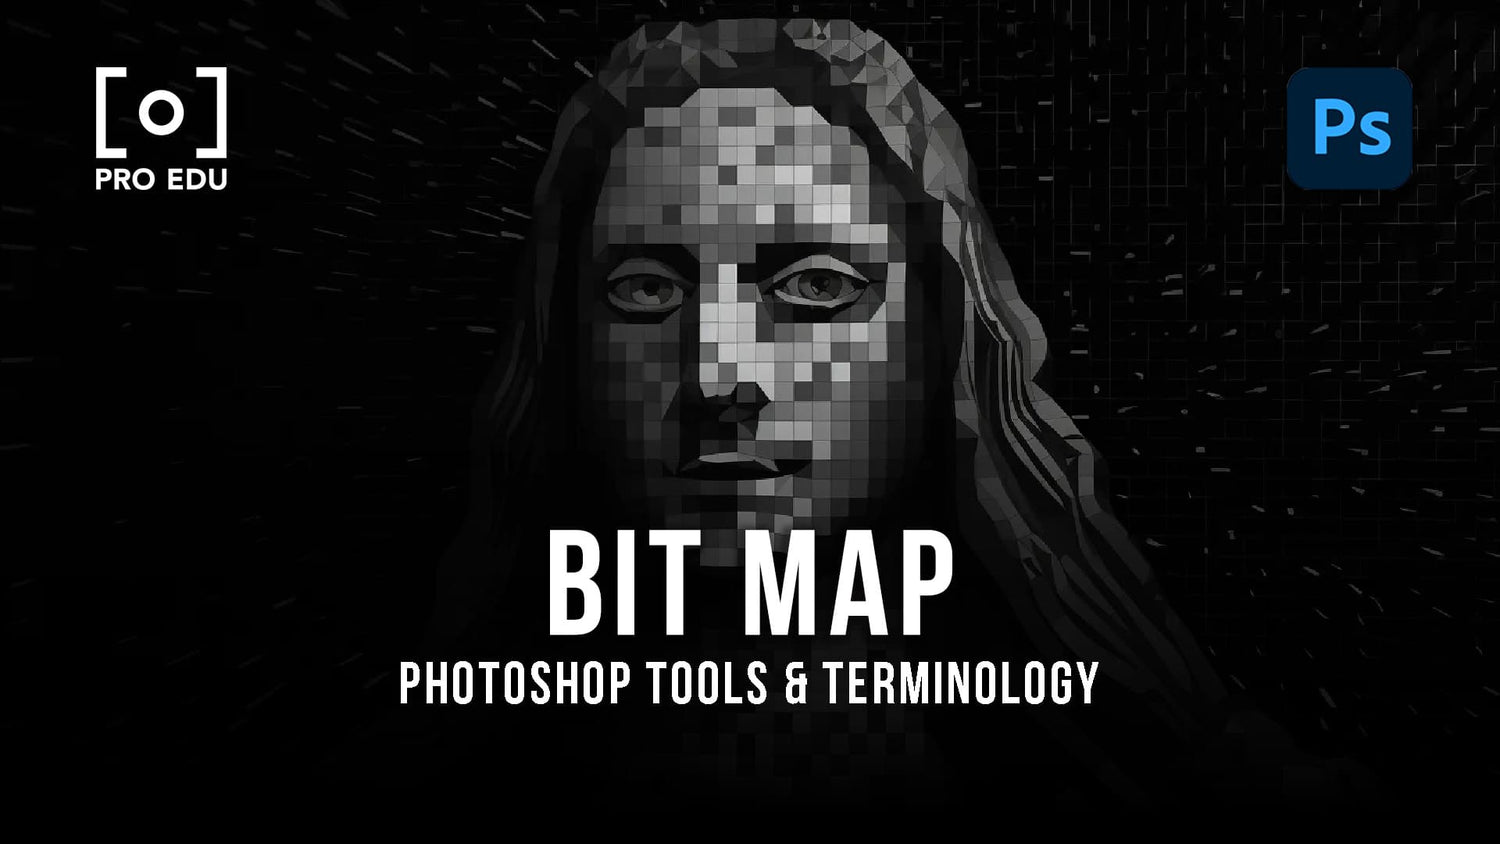 Bitmap Images in Photoshop - PRO EDU Guide